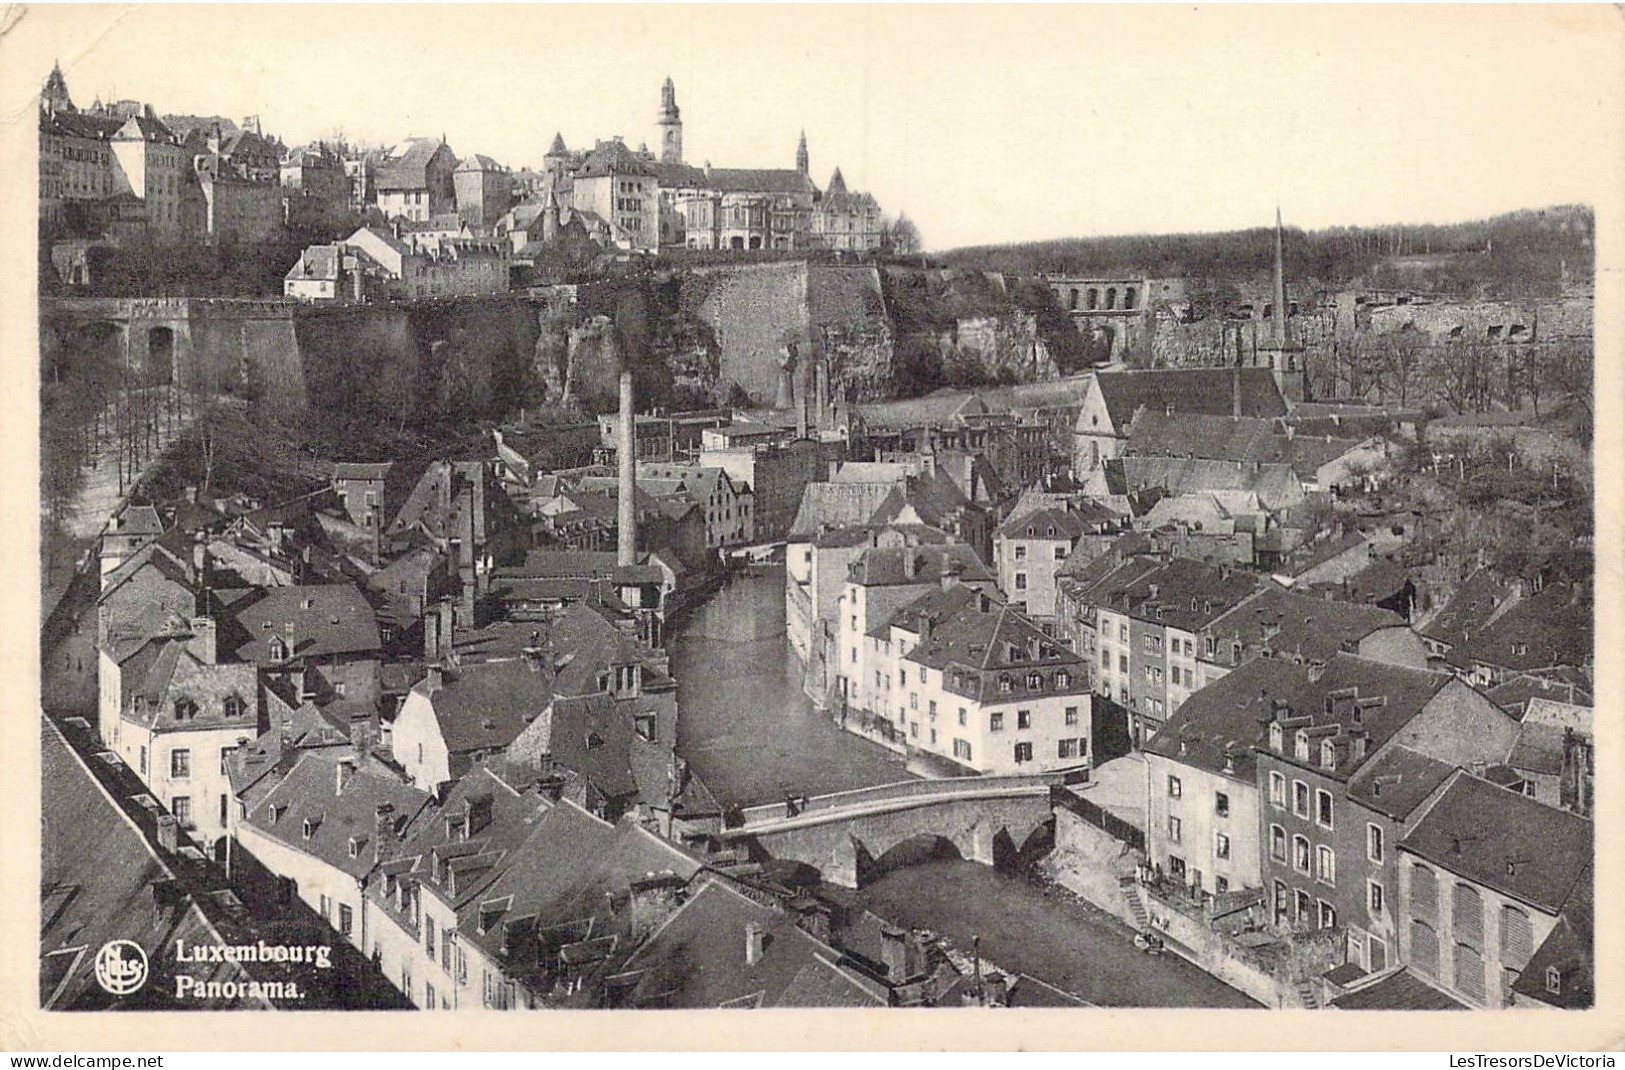 LUXEMBOURG - Panorama - Carte Postale Ancienne - Luxemburg - Stad